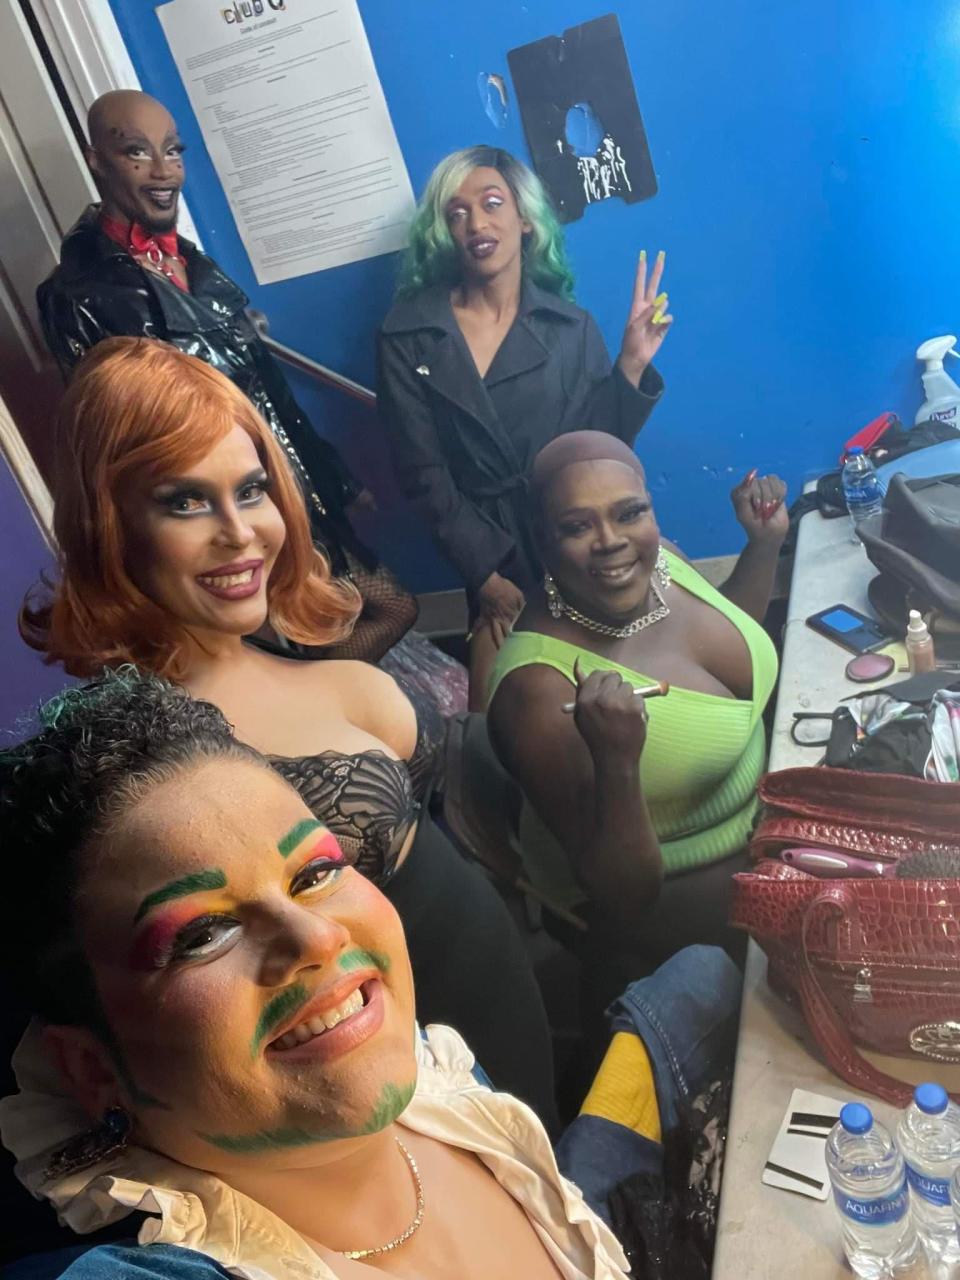 Tiara Kelley (seated first from right) poses with fellow performers inside Club Q in Colorado Springs, Colorado, in this undated photograph. Kelley, who performed at Club Q for the past six months and signed a contract with it roughly four weeks ago, hosted a weekly Friday night drag show at the club.